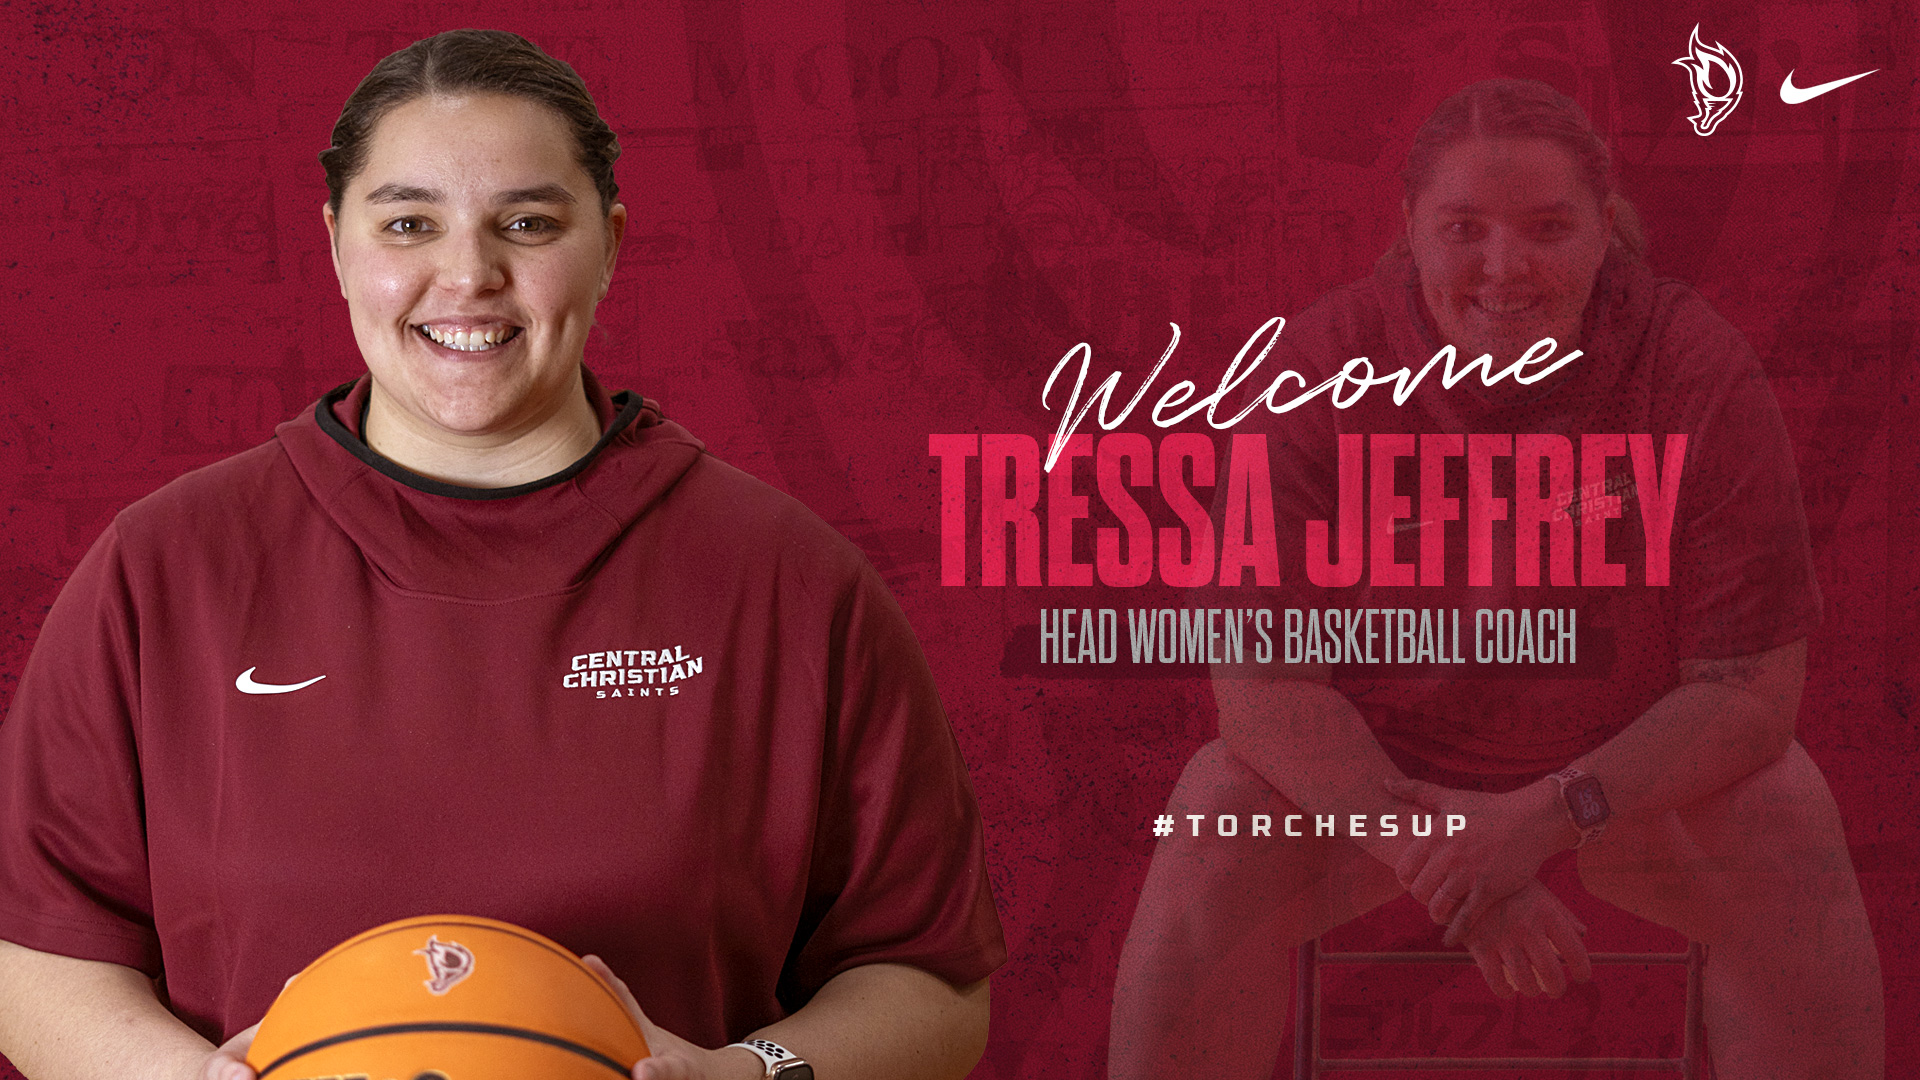 Tressa Jeffrey was announced as Head Women's Basketball Coach at Central Christian College of the Bible on Monday.